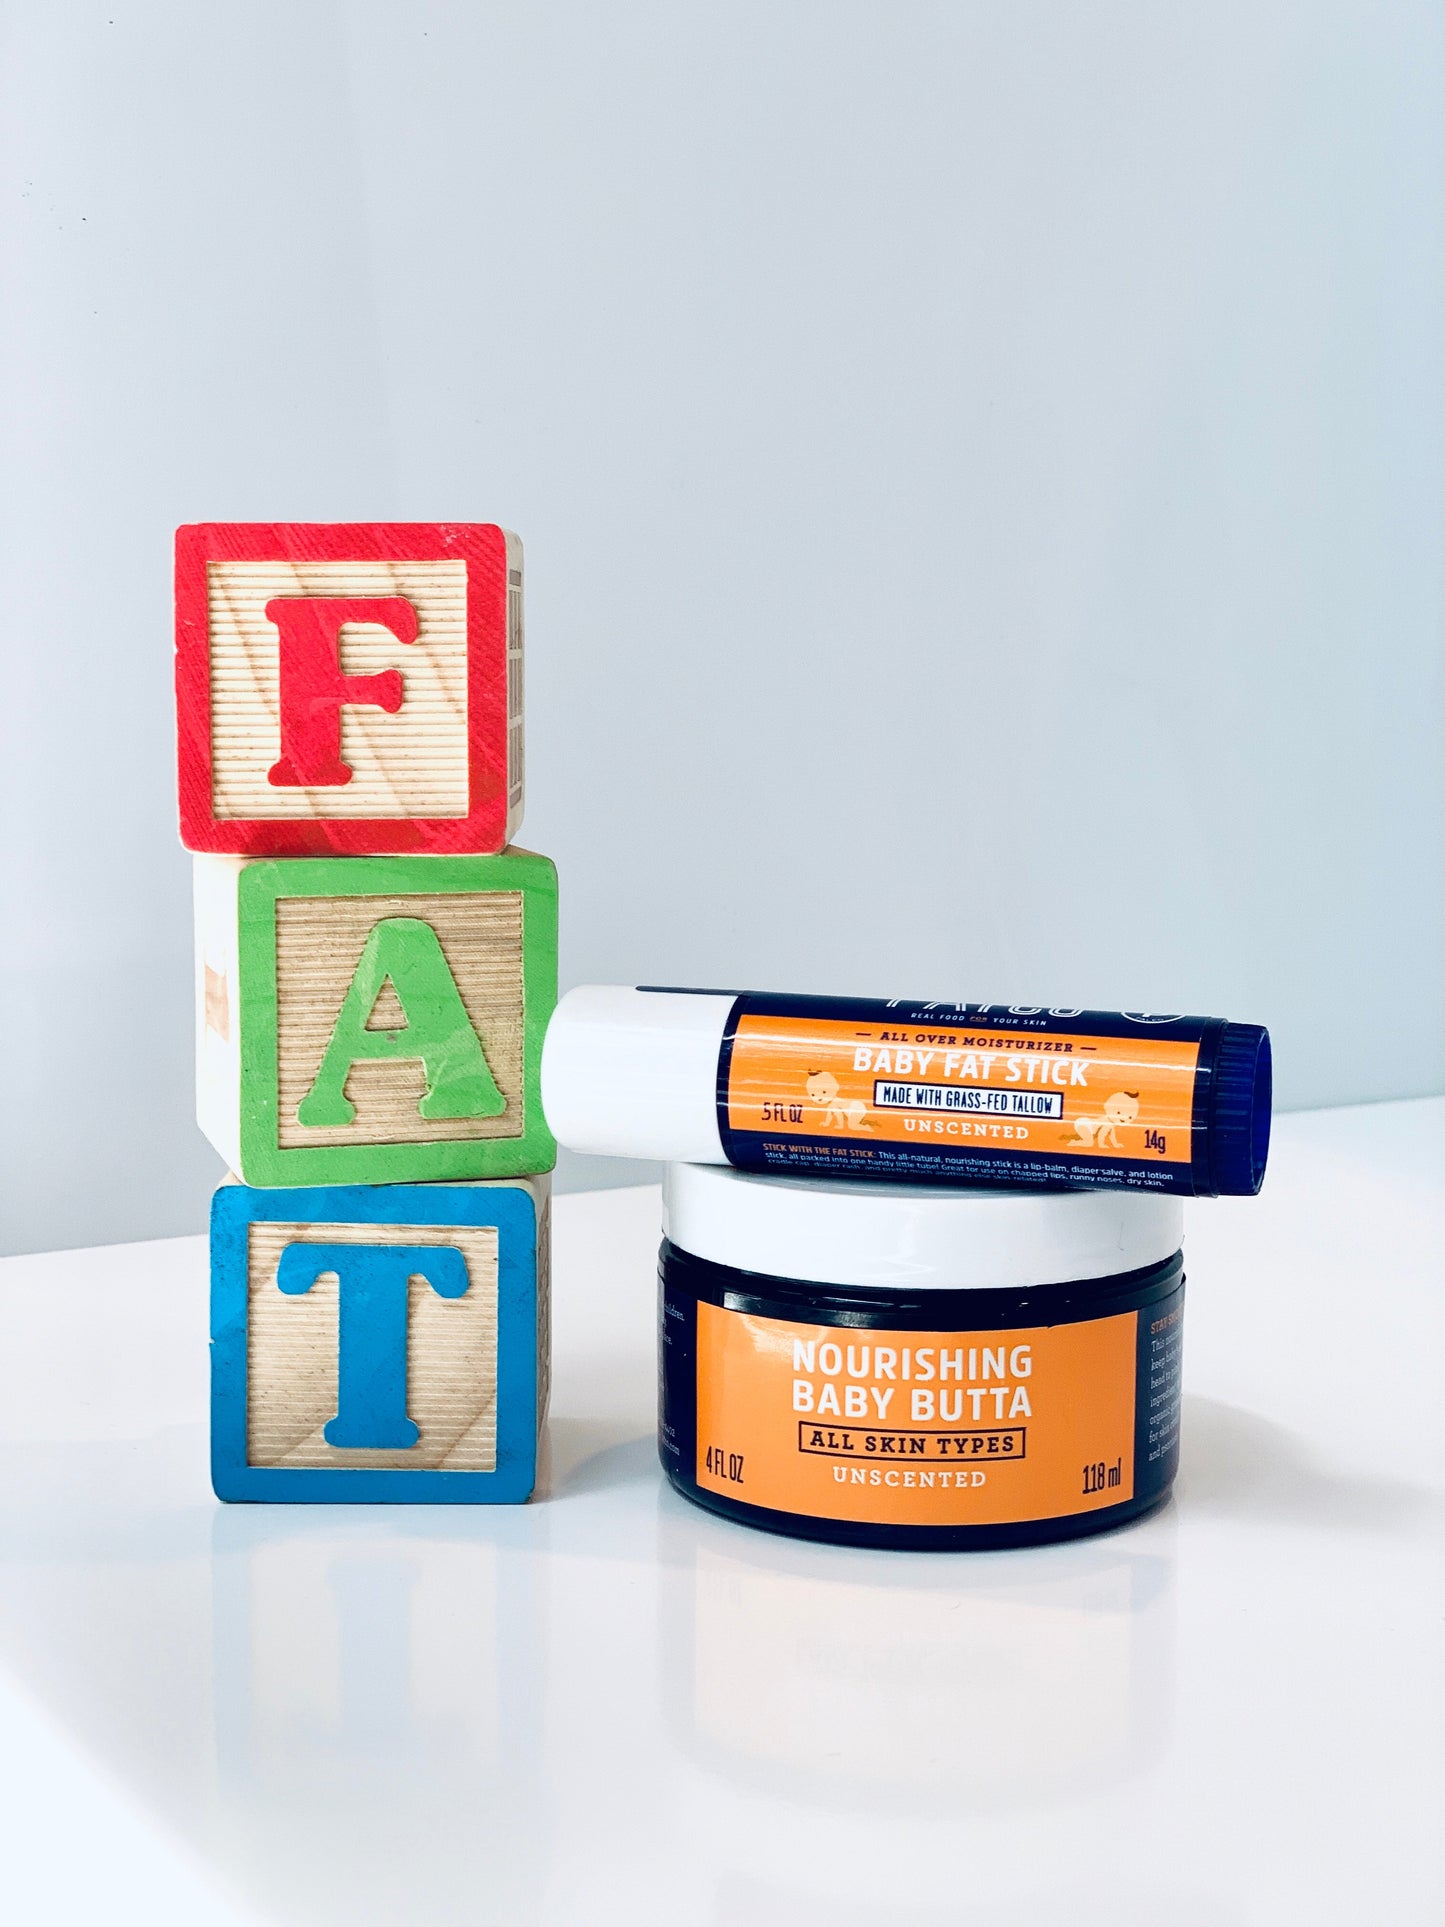 "Baby On The Way" Gift Set by FATCO Skincare Products